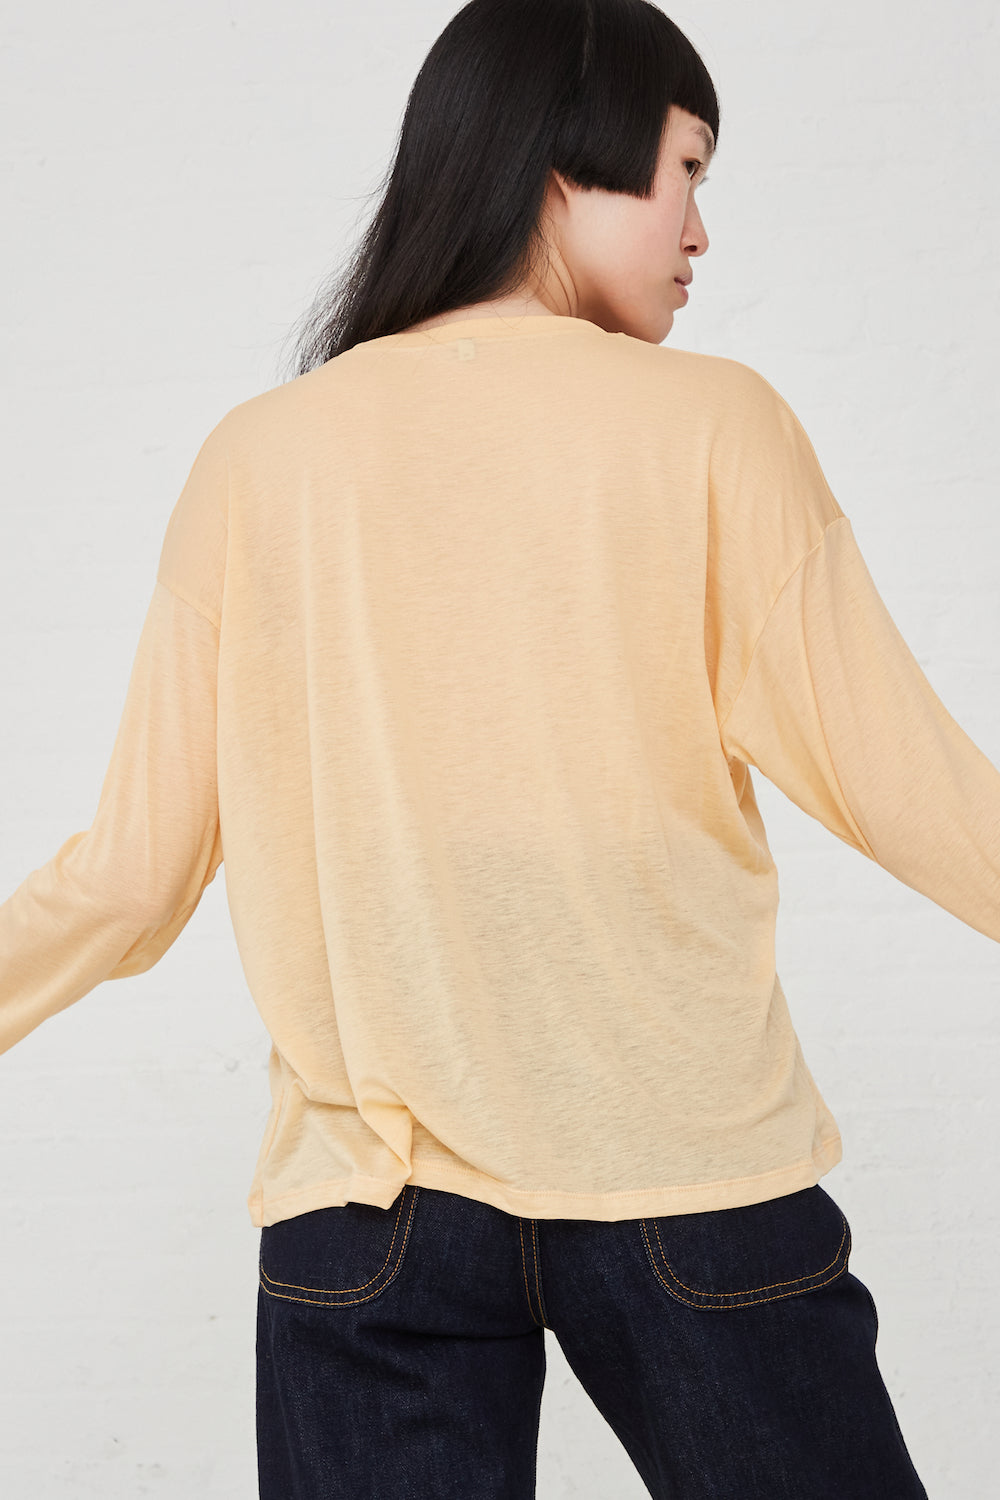 Baserange - Loose Long Sleeve Tee in Daf Yellow full front view on model.